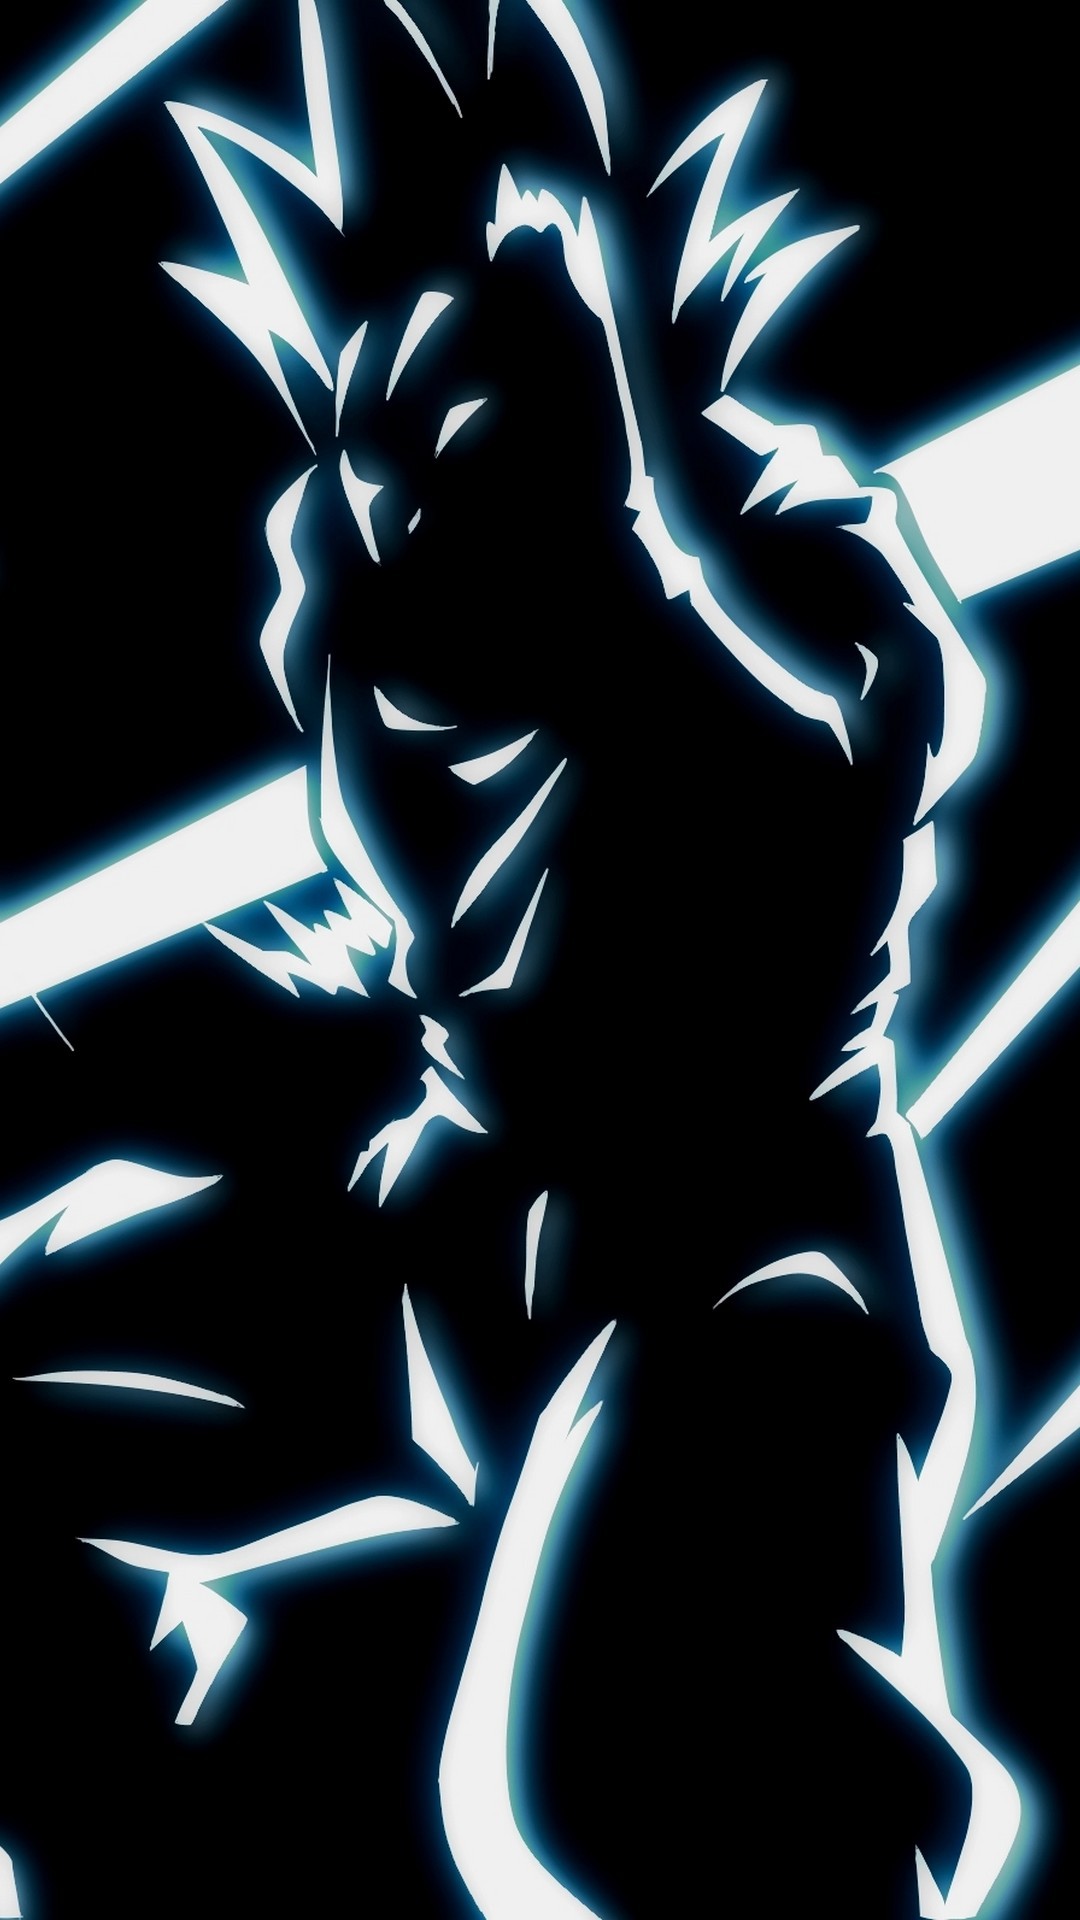 Black Goku Wallpaper For Android with HD resolution 1080x1920